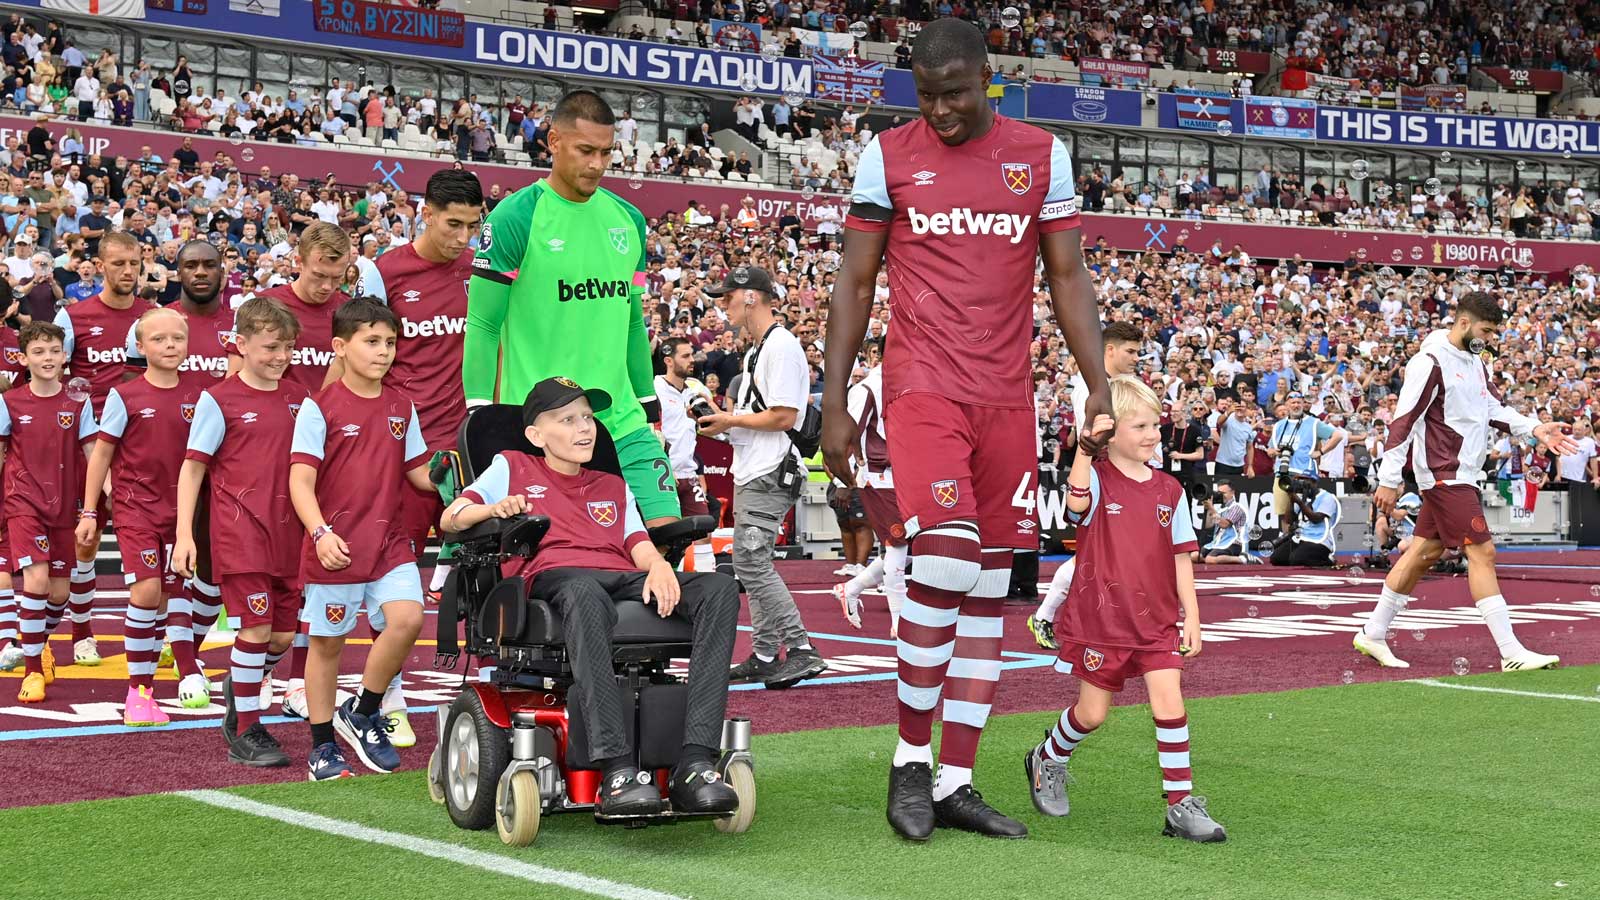 Charlie leads the Hammers out as mascot against Manchester City